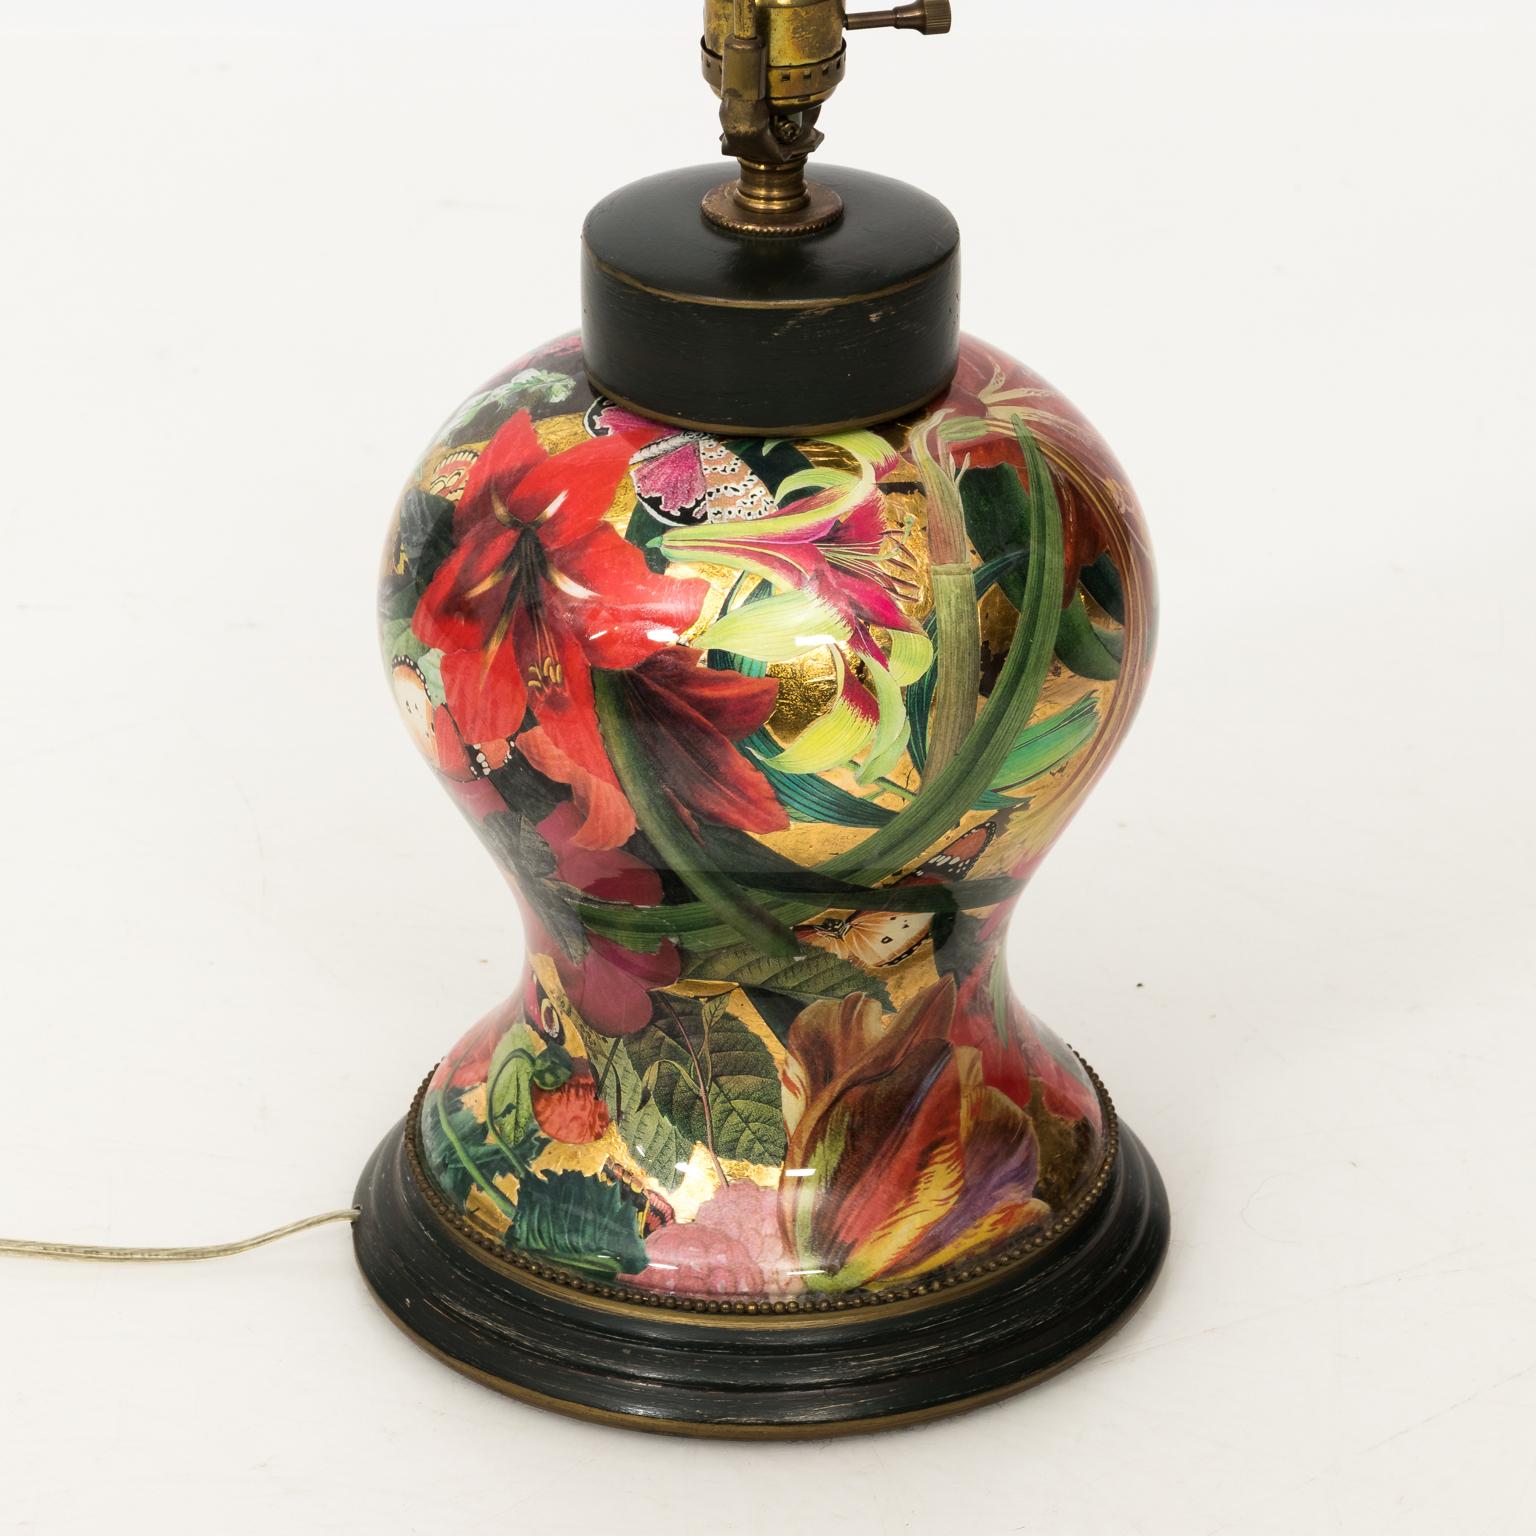 Custom designed floral decoupage lamp from Boston Design Center. Reds, pinks, green. Excellent condition. Shade not included.
 